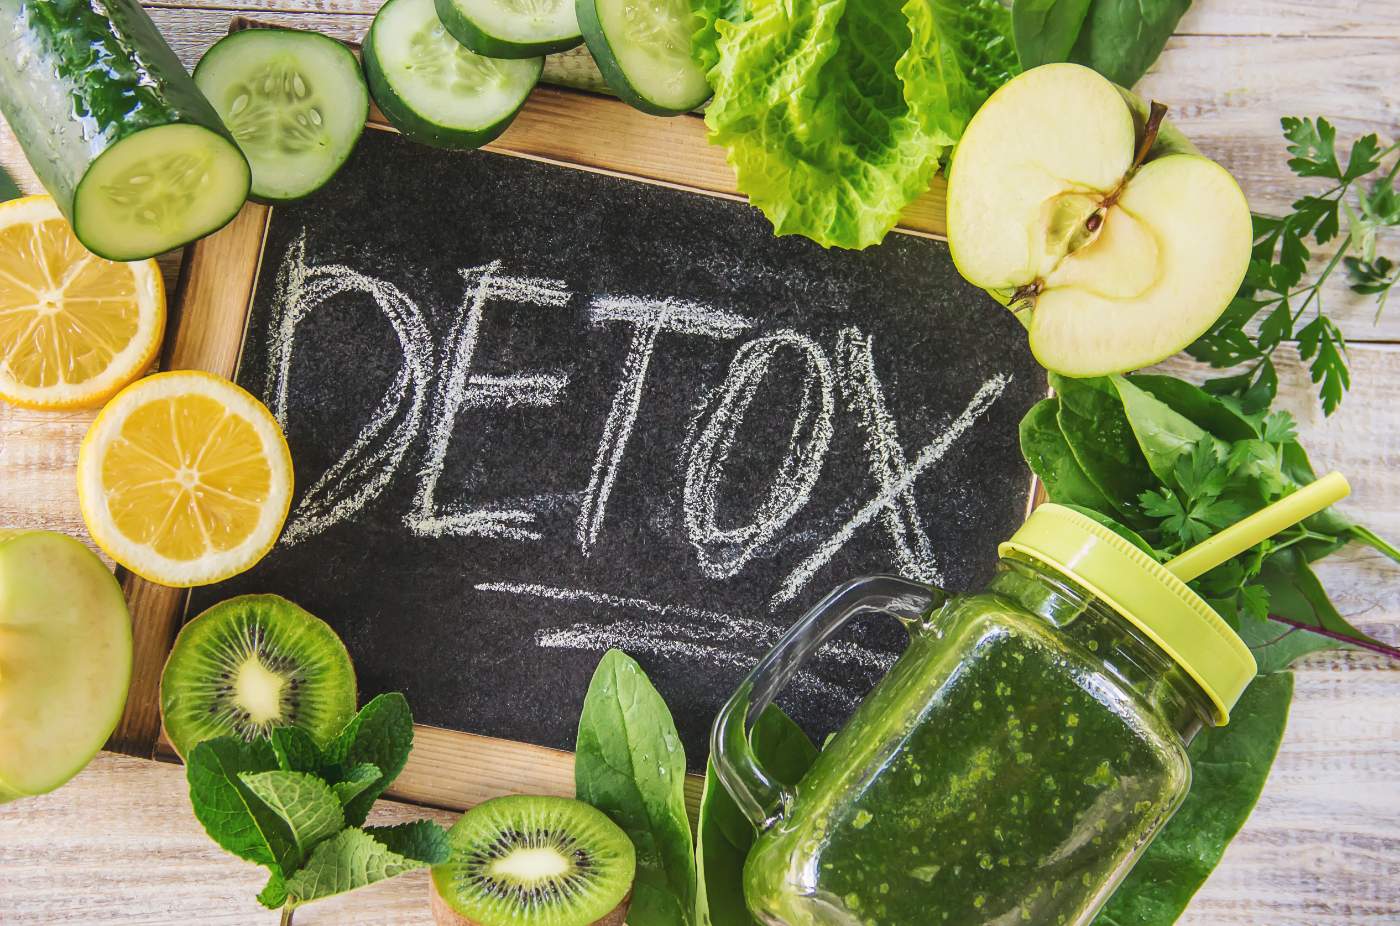 The importance of detoxifying the liver